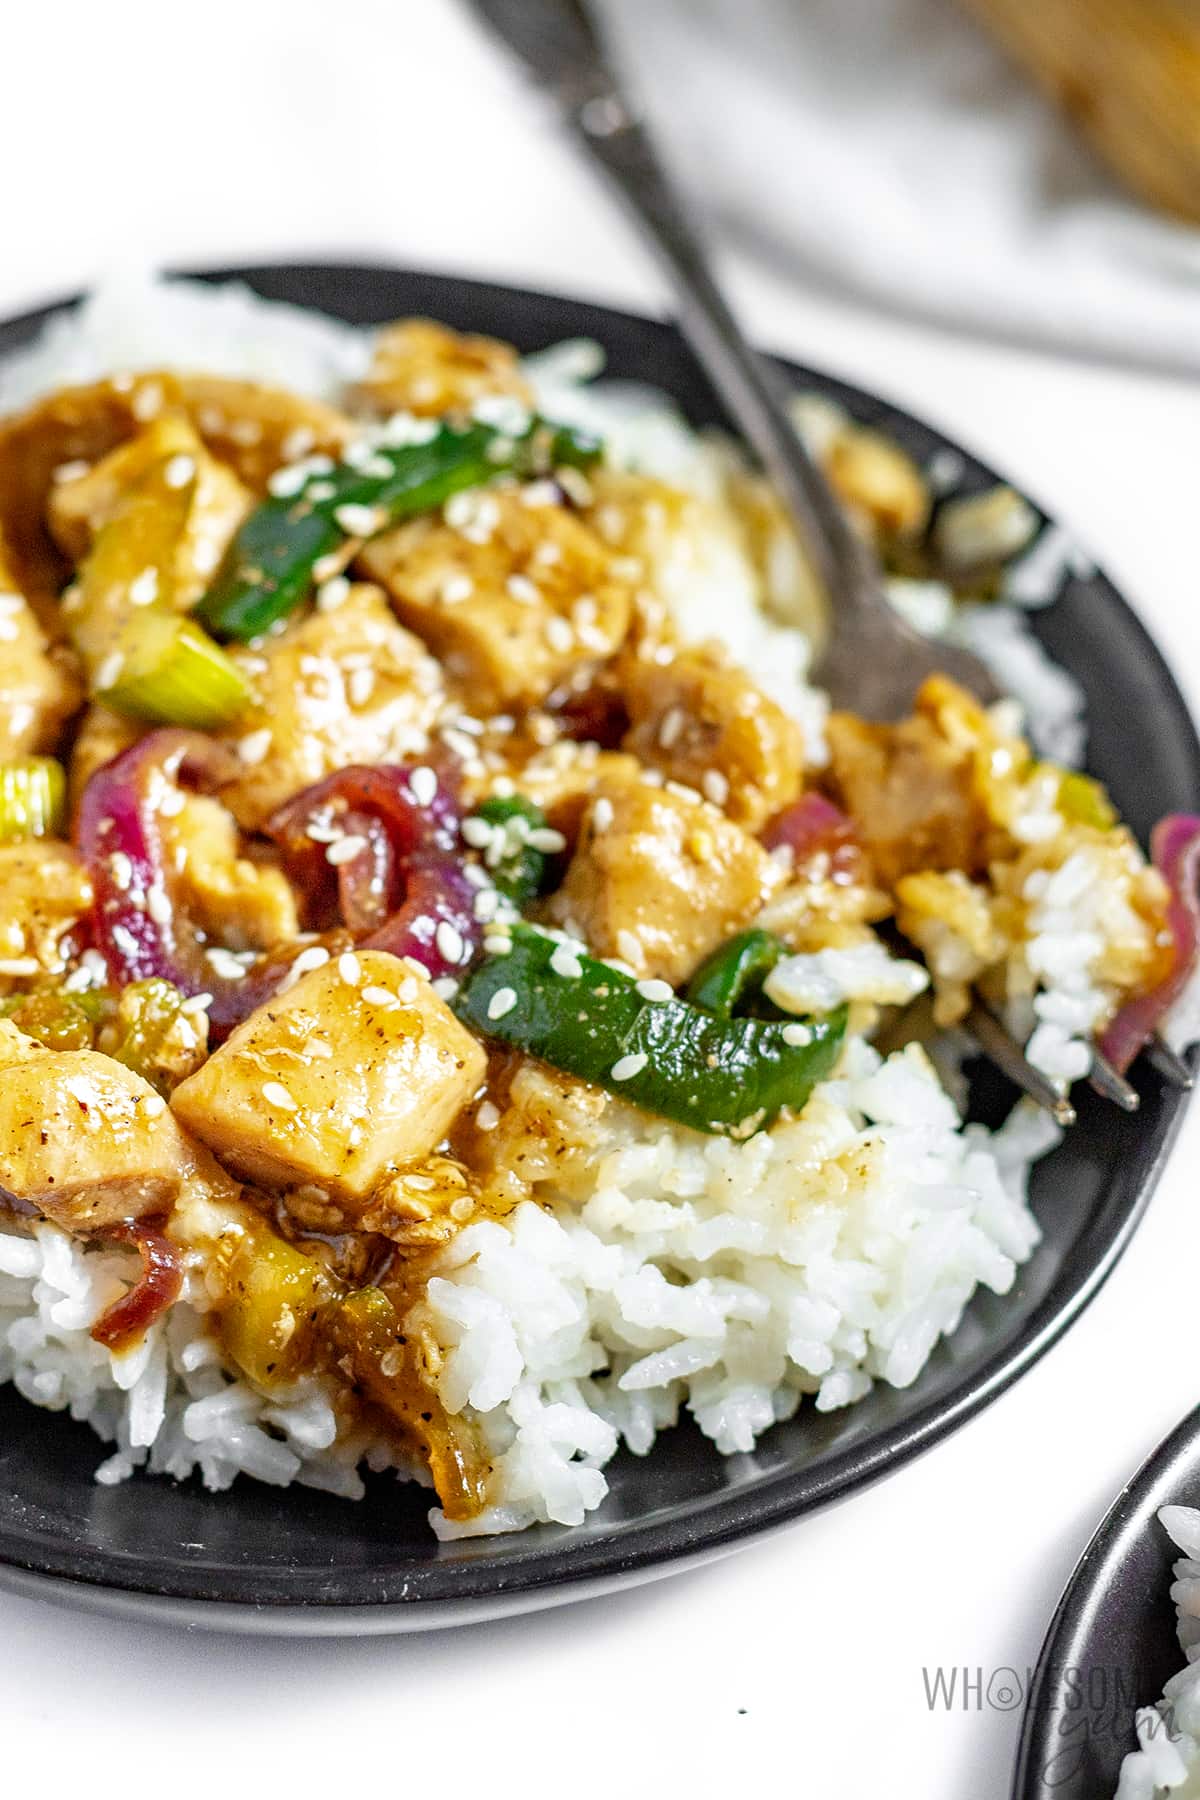 Black pepper chicken with rice in a bowl, close up.